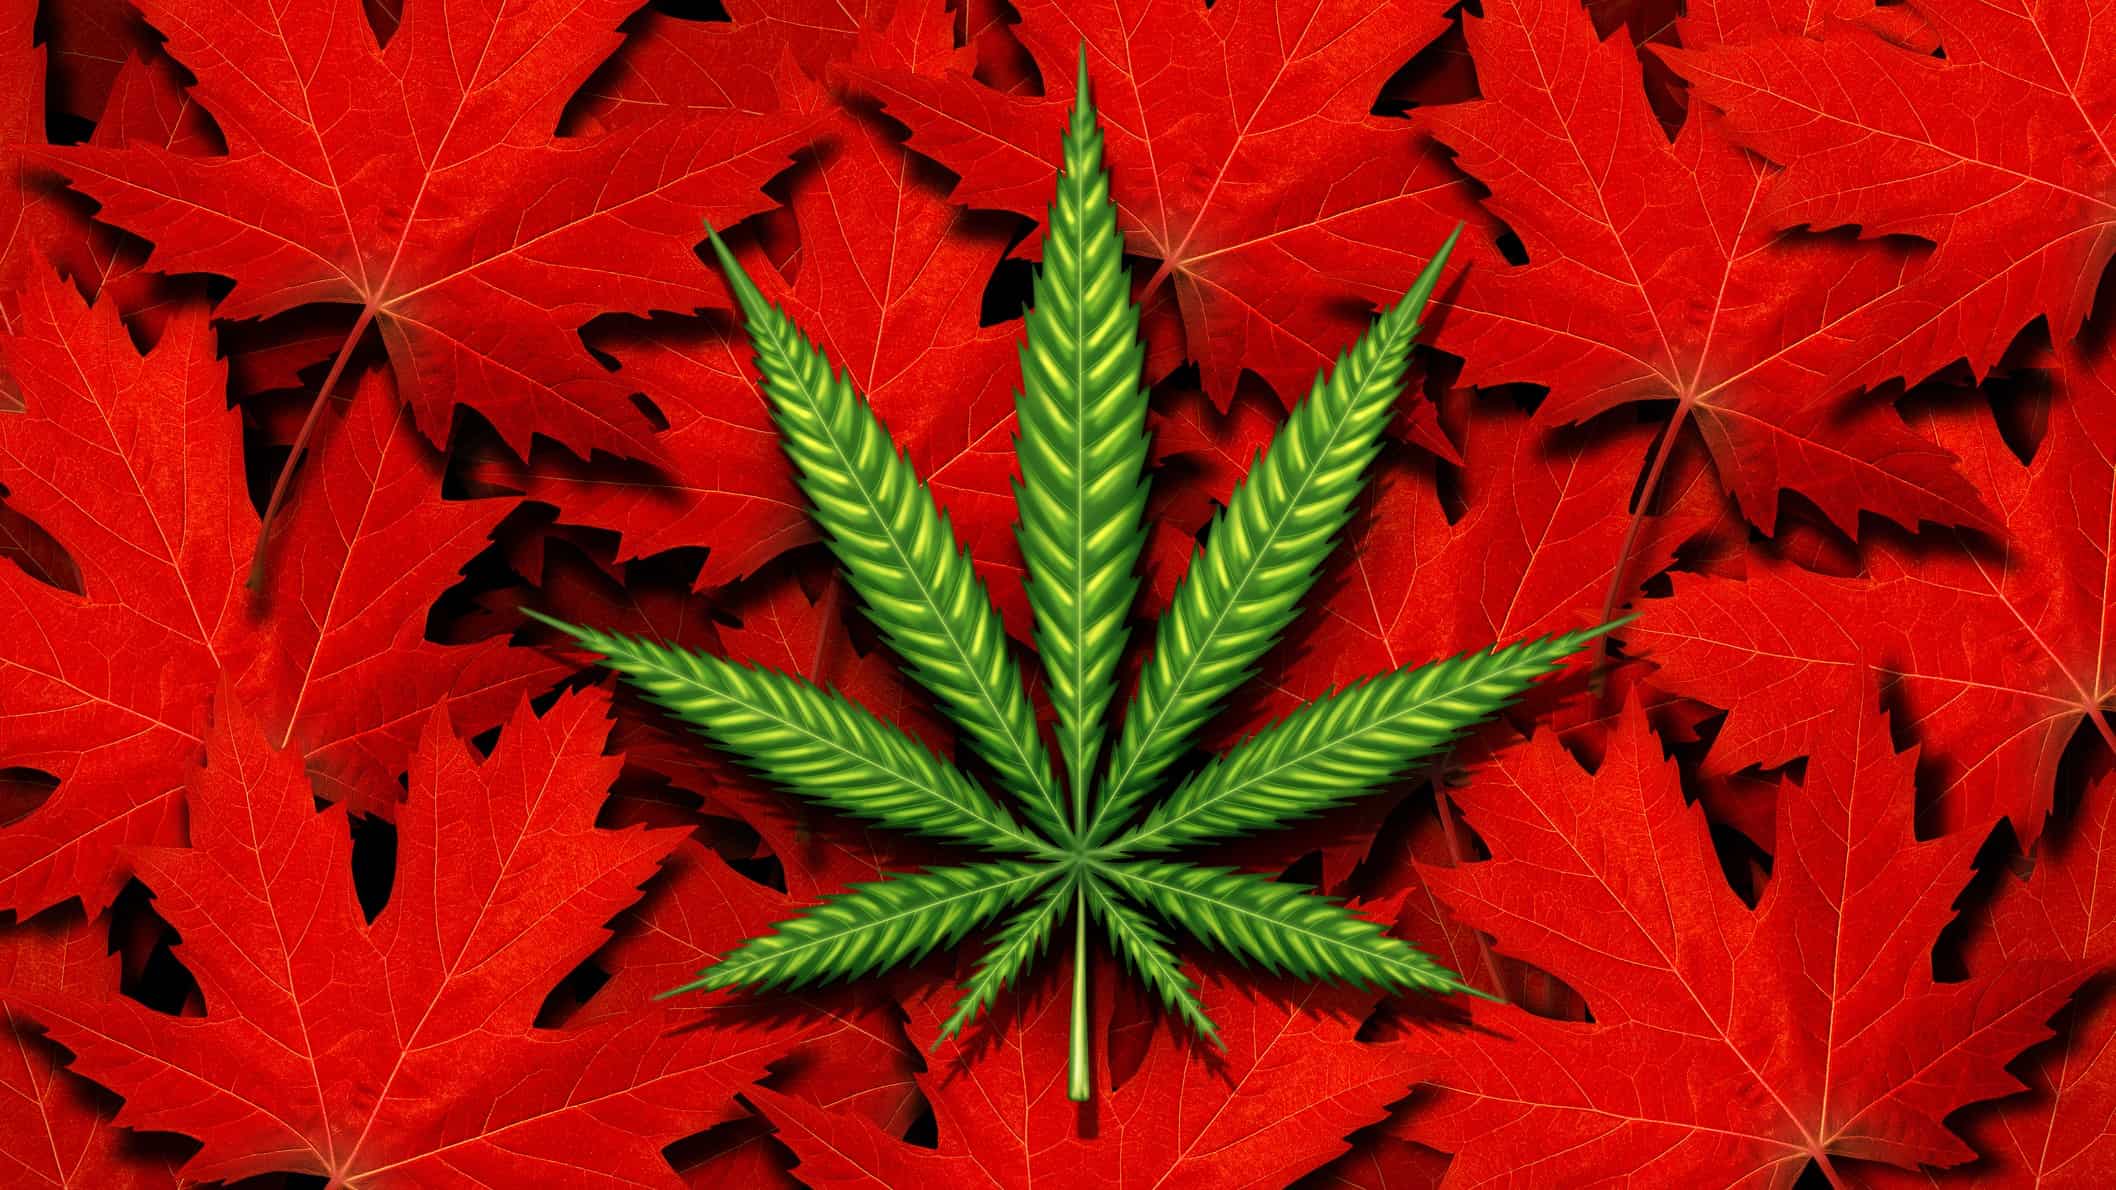 asx share price represented by green cannabis leaf sitting atop red maple leaves